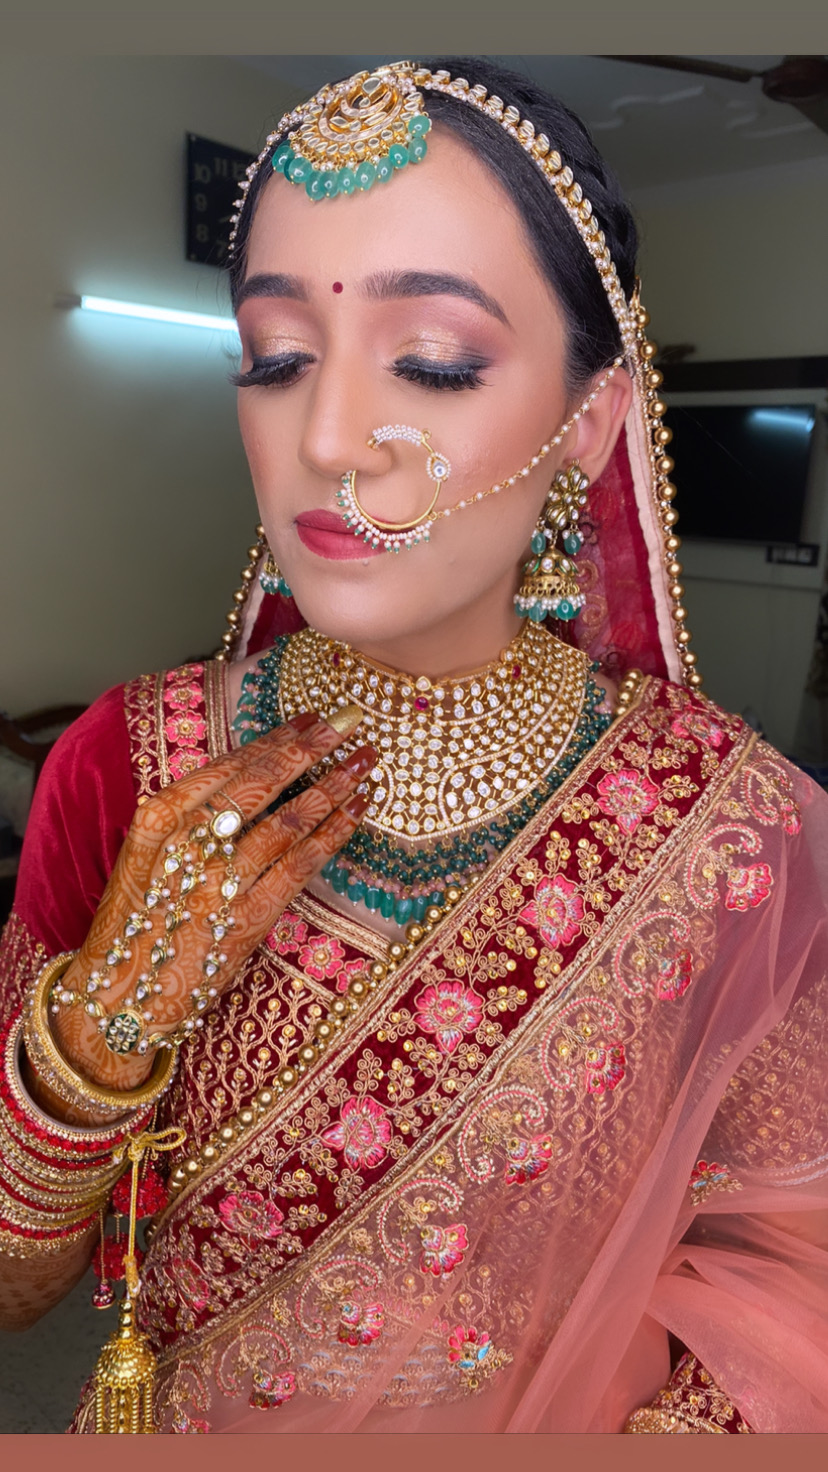 Geetanjali Makeup Artist Services, Review and Info - Olready